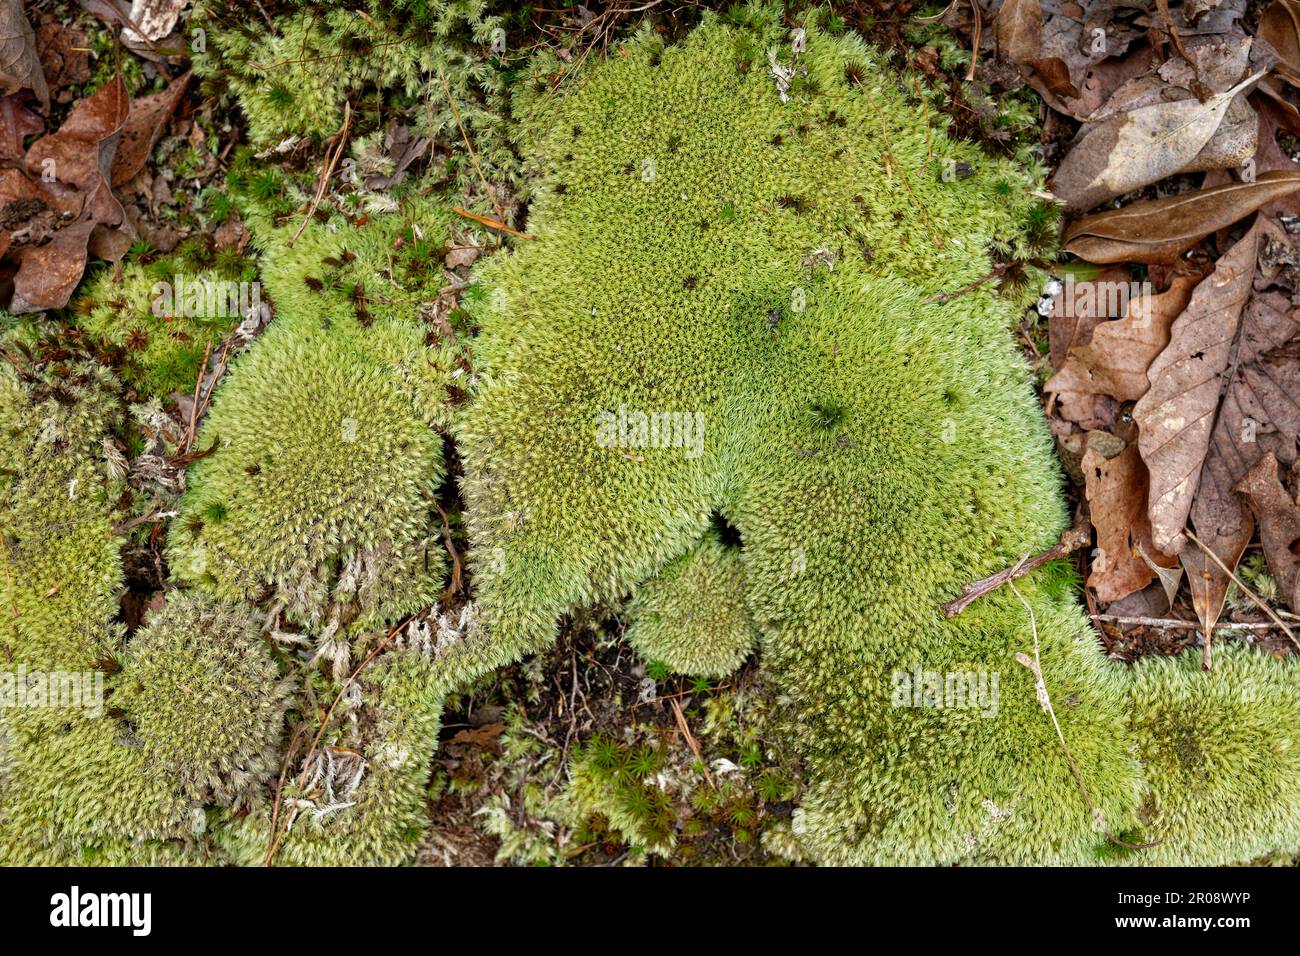 Partial rock out of the ground with tiny dense carpet of different shades of green moss covering the rock surrounded by fallen leaves on the forest gr Stock Photo